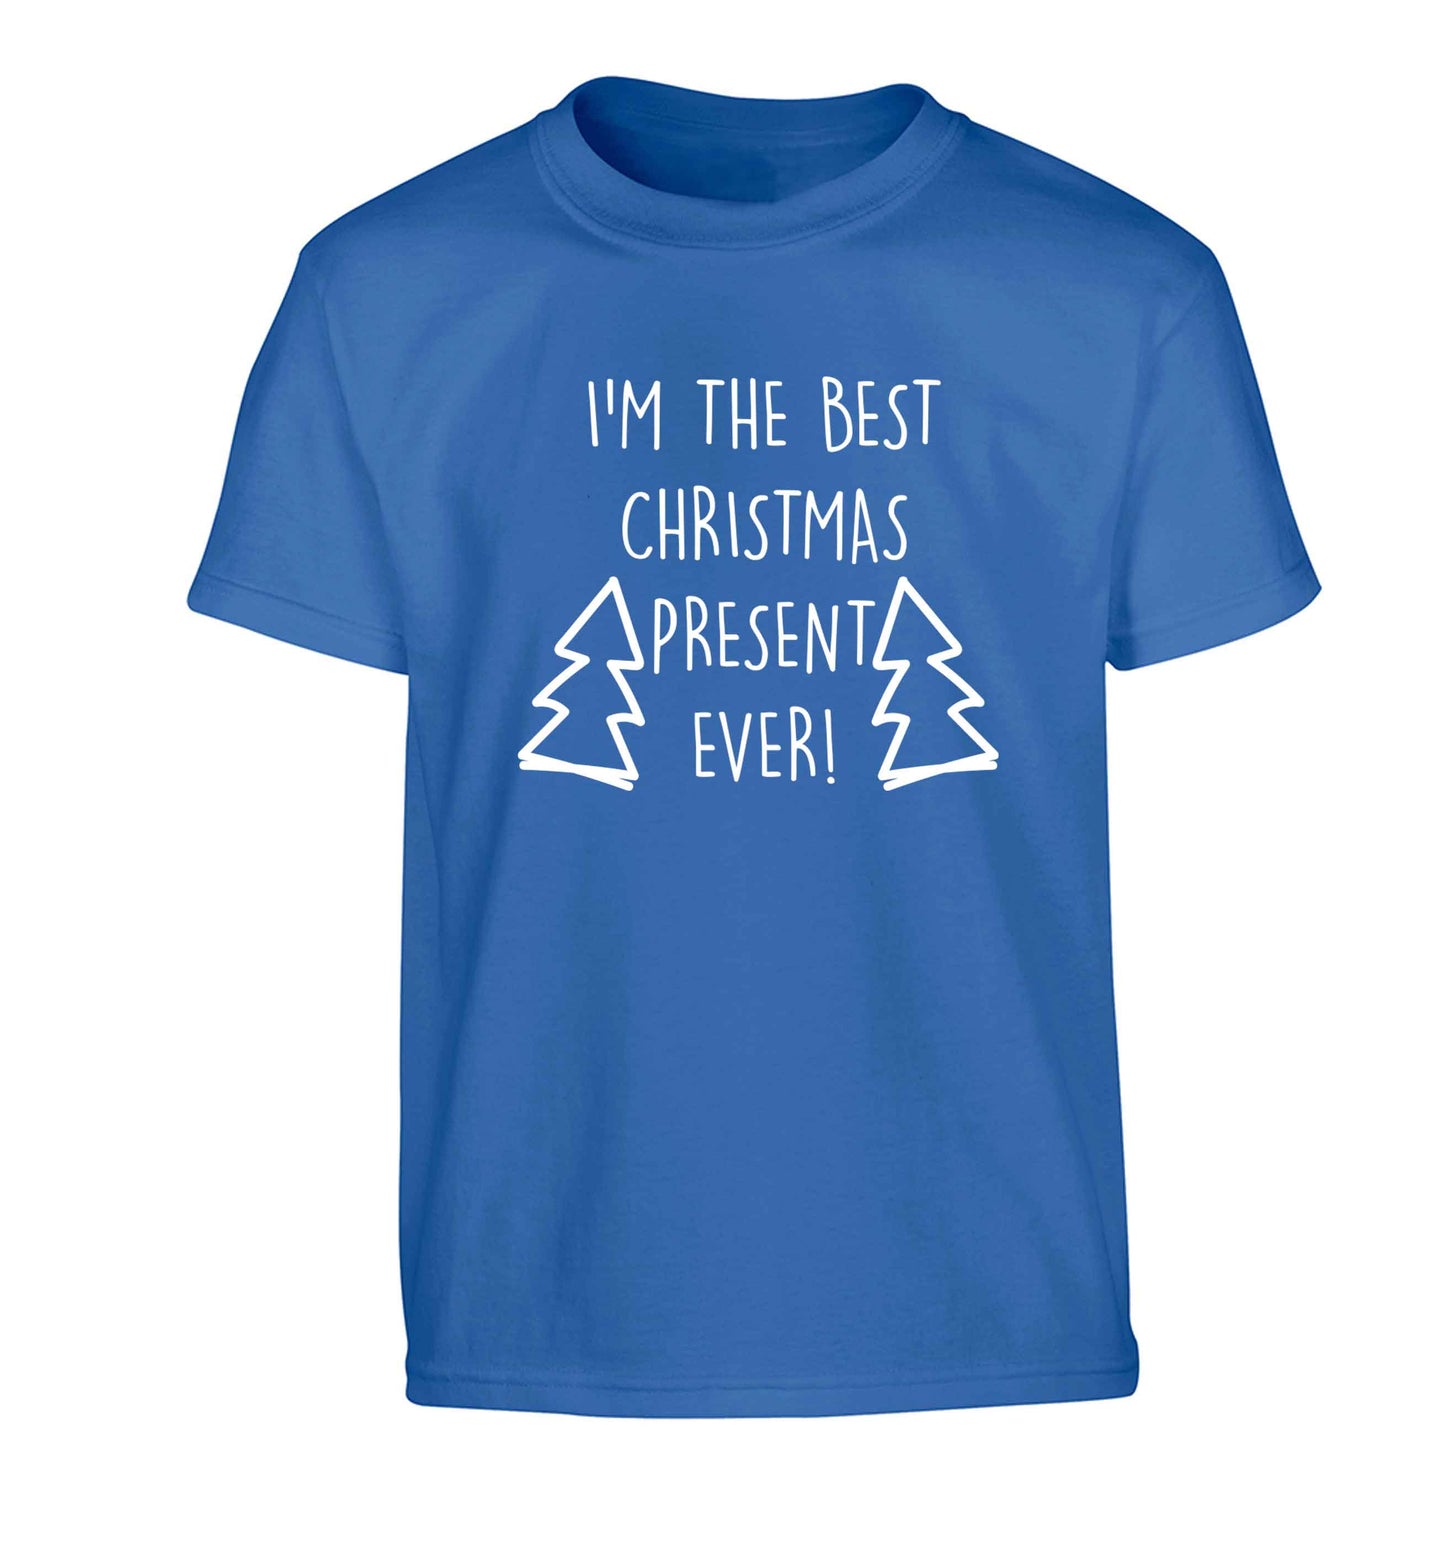 I'm the best Christmas present ever Children's blue Tshirt 12-13 Years